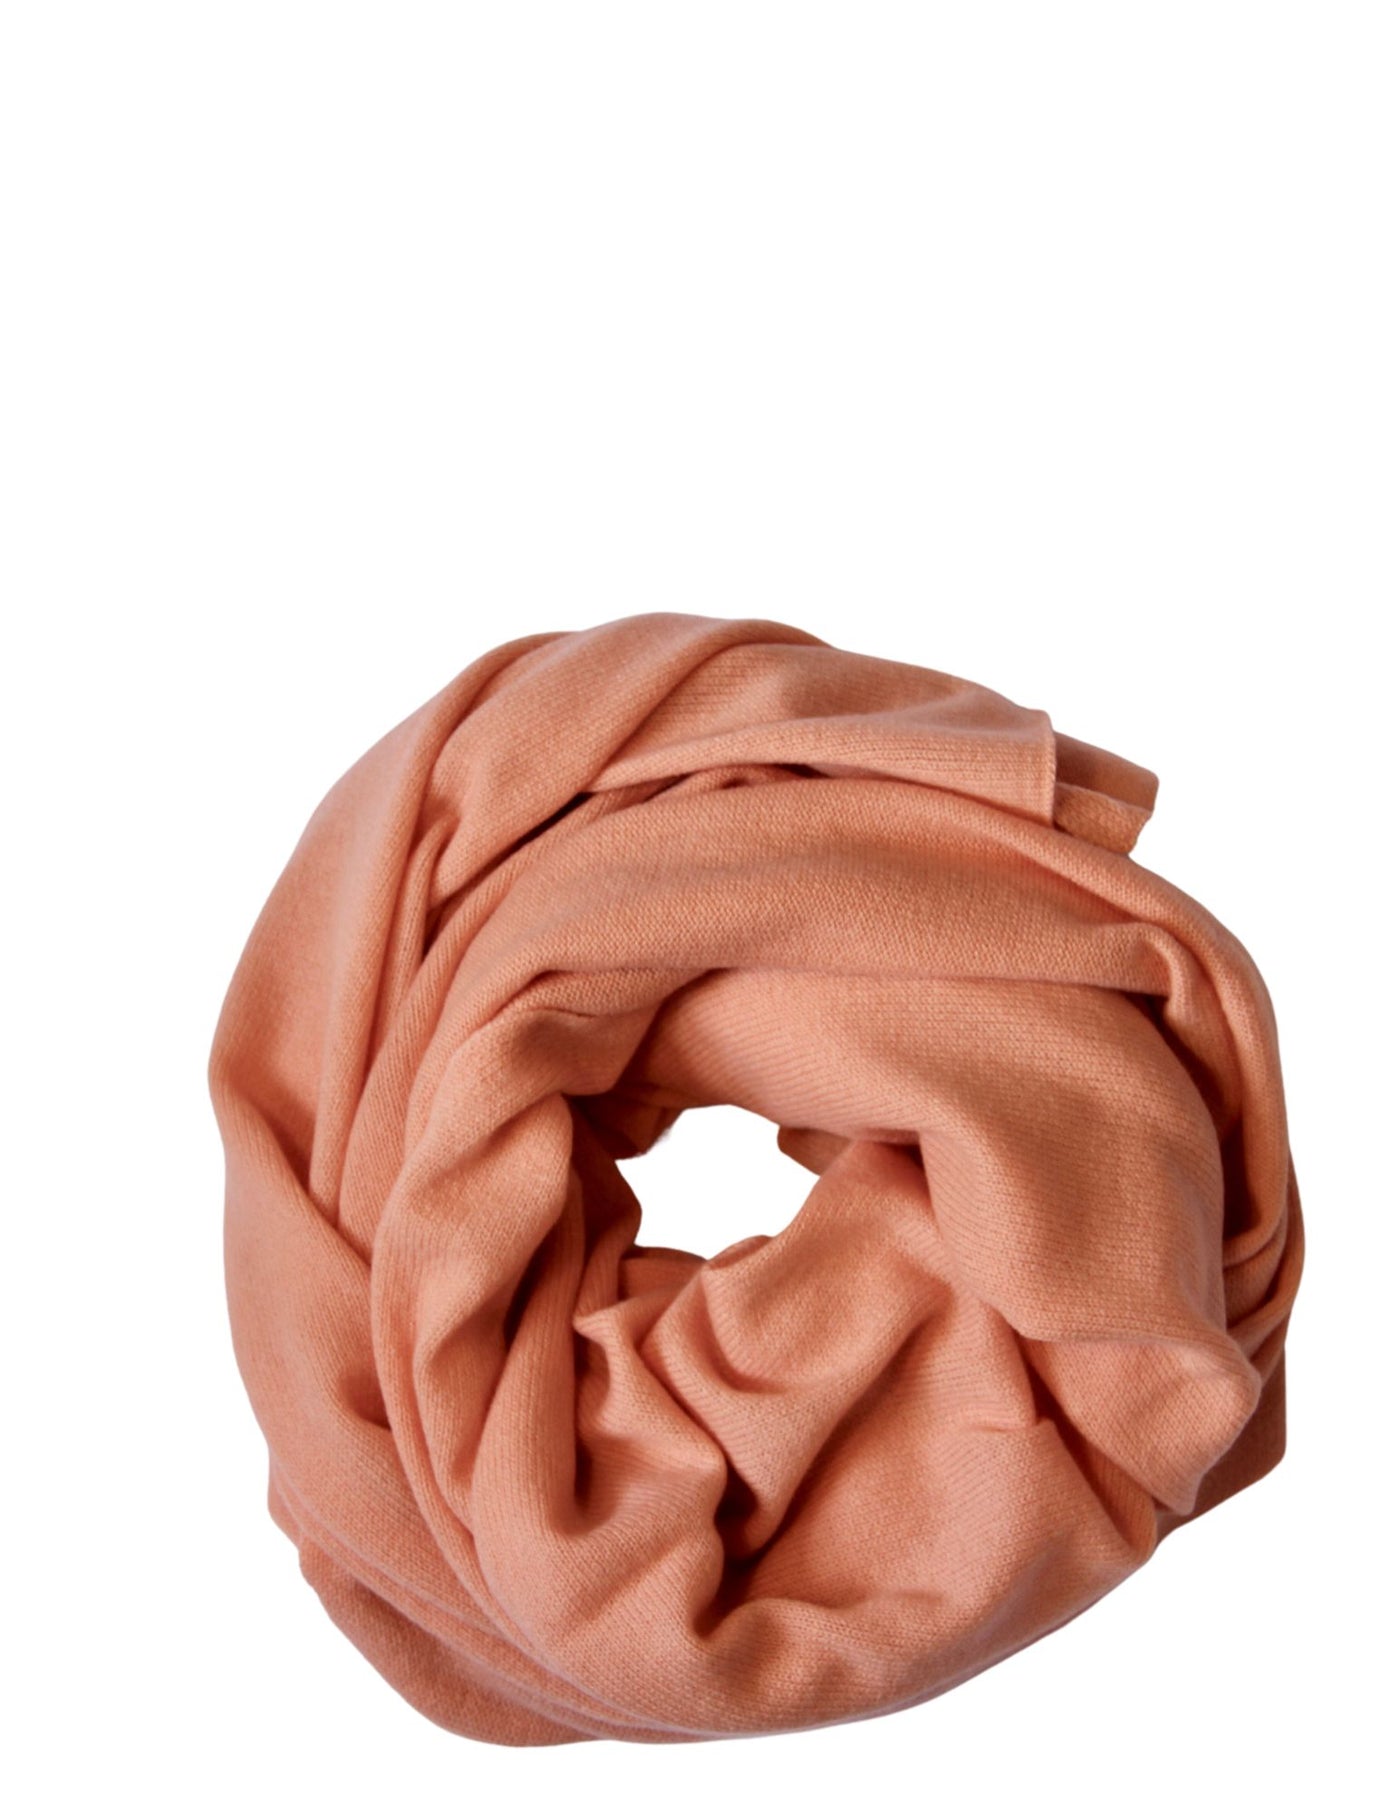 The Cashmere Travel Wrap Nectar